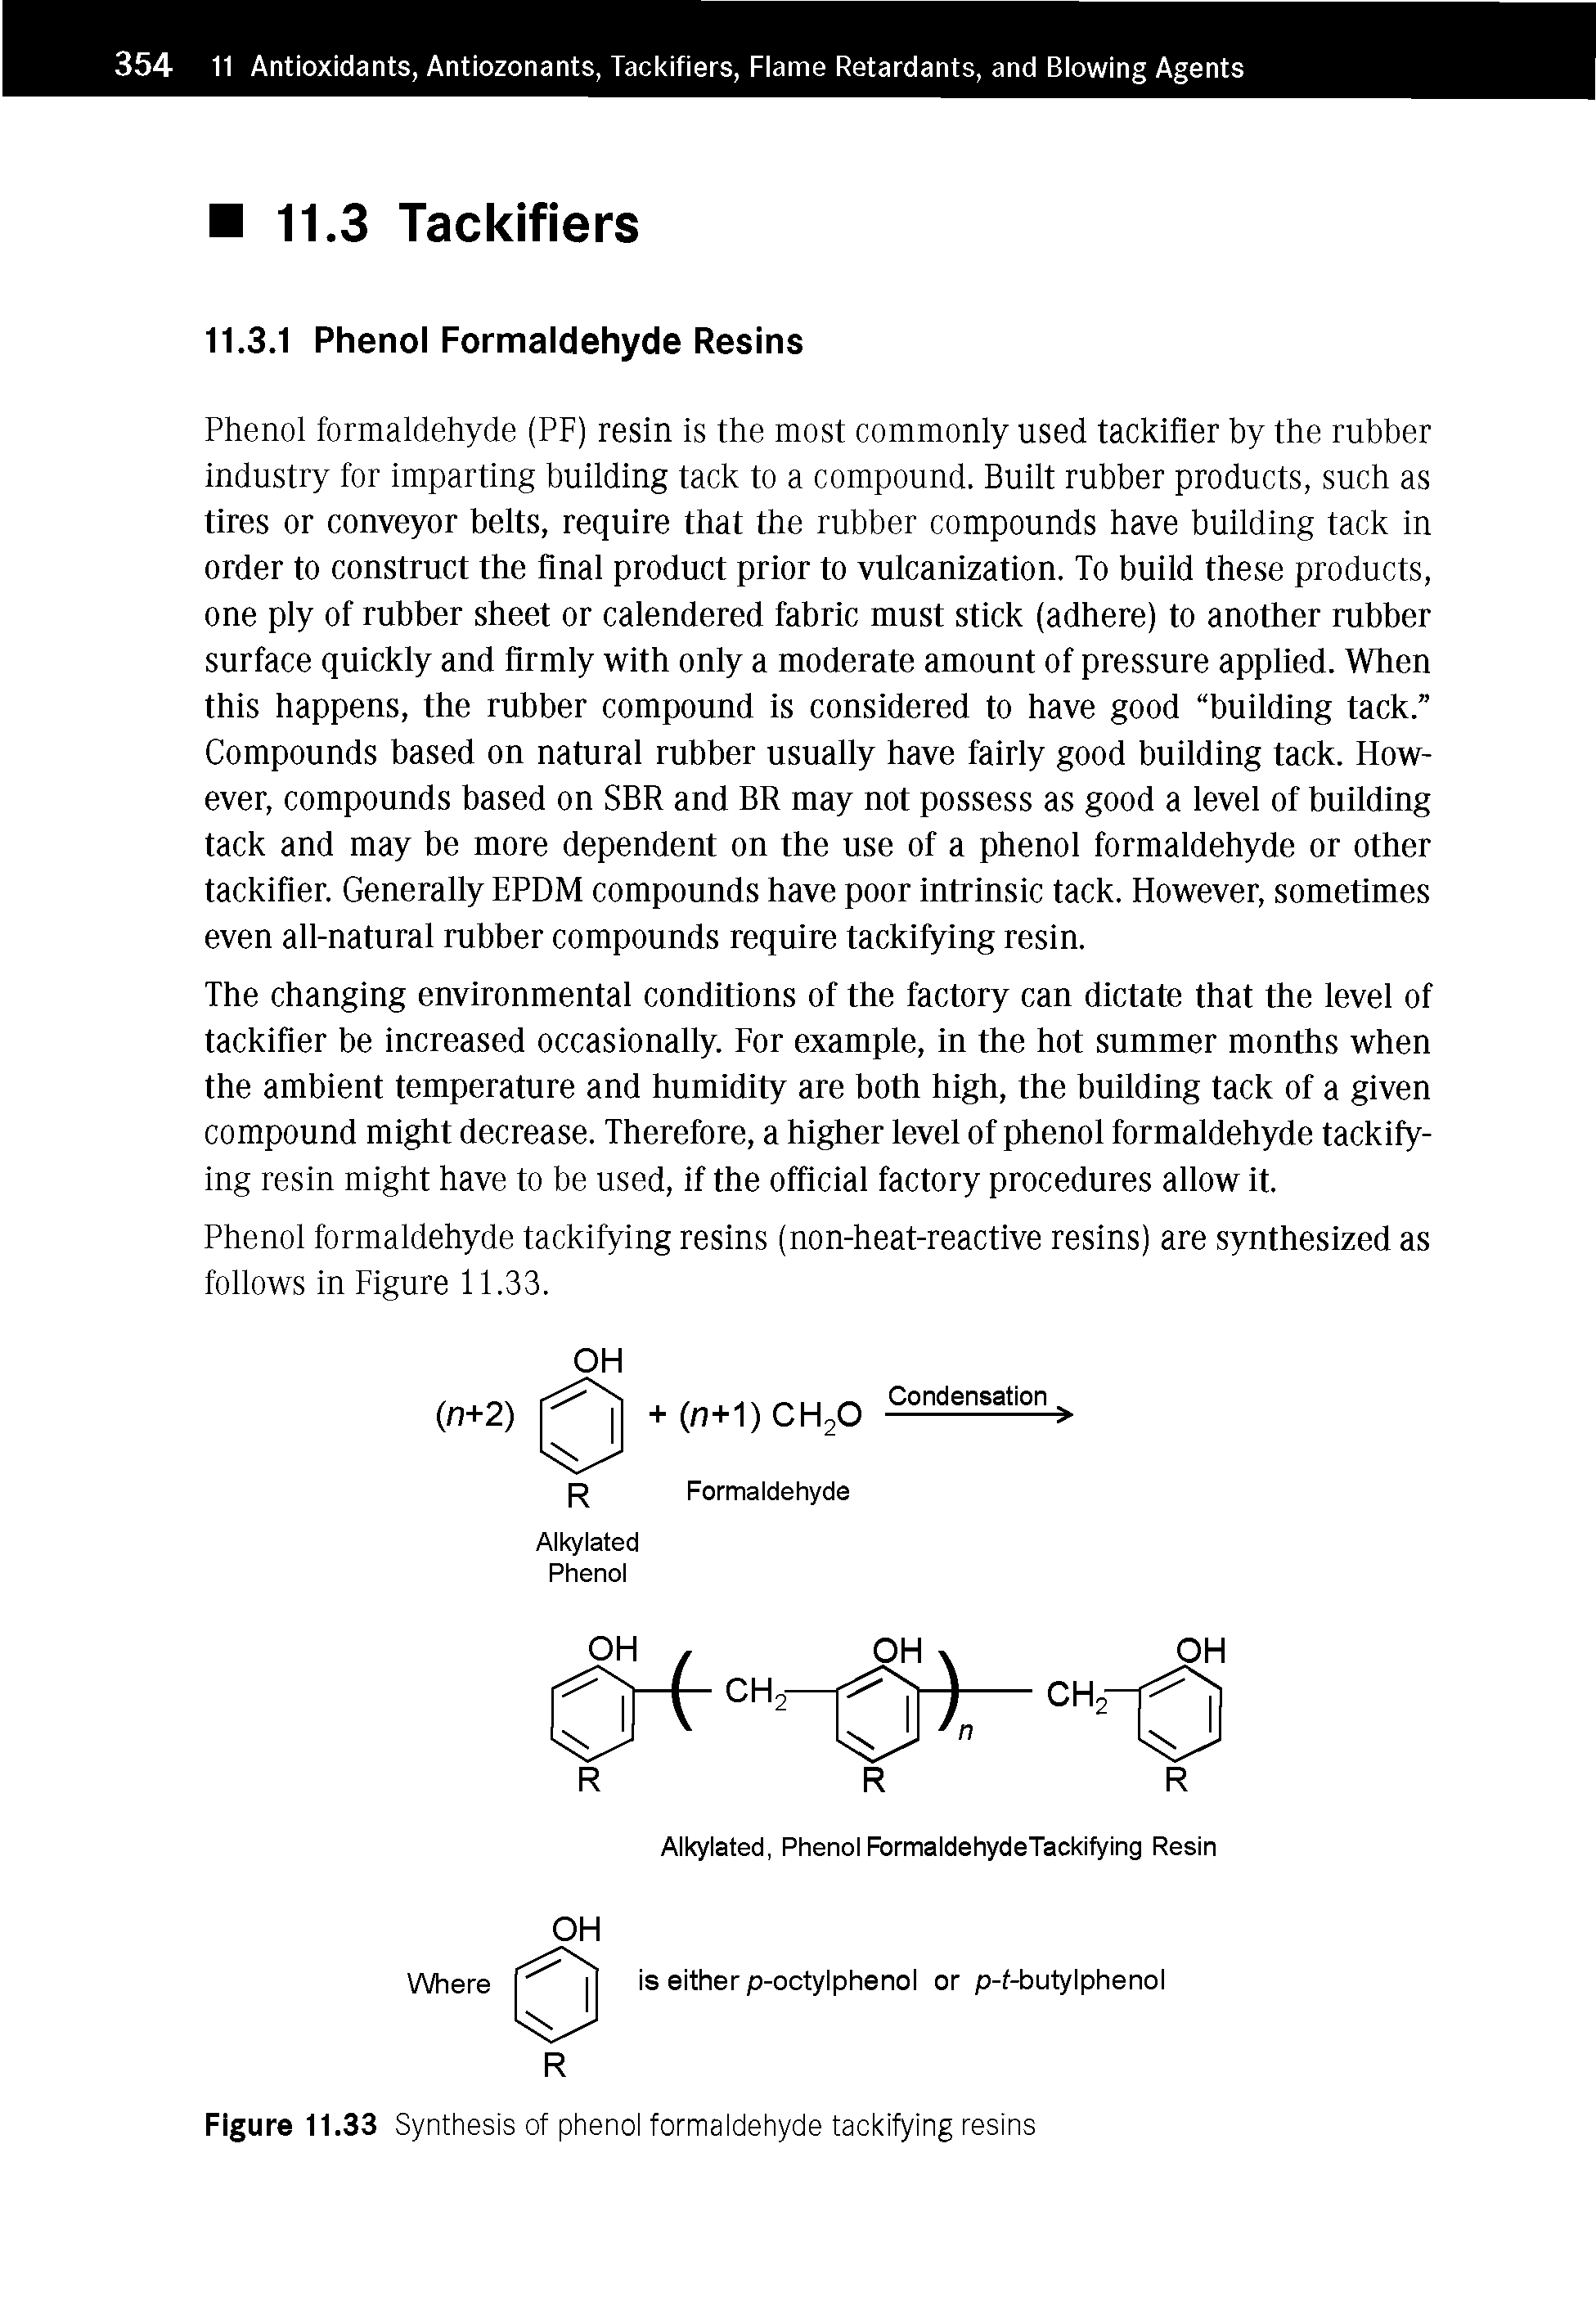 Figure 11.33 Synthesis of phenol formaldehyde tackifying resins...